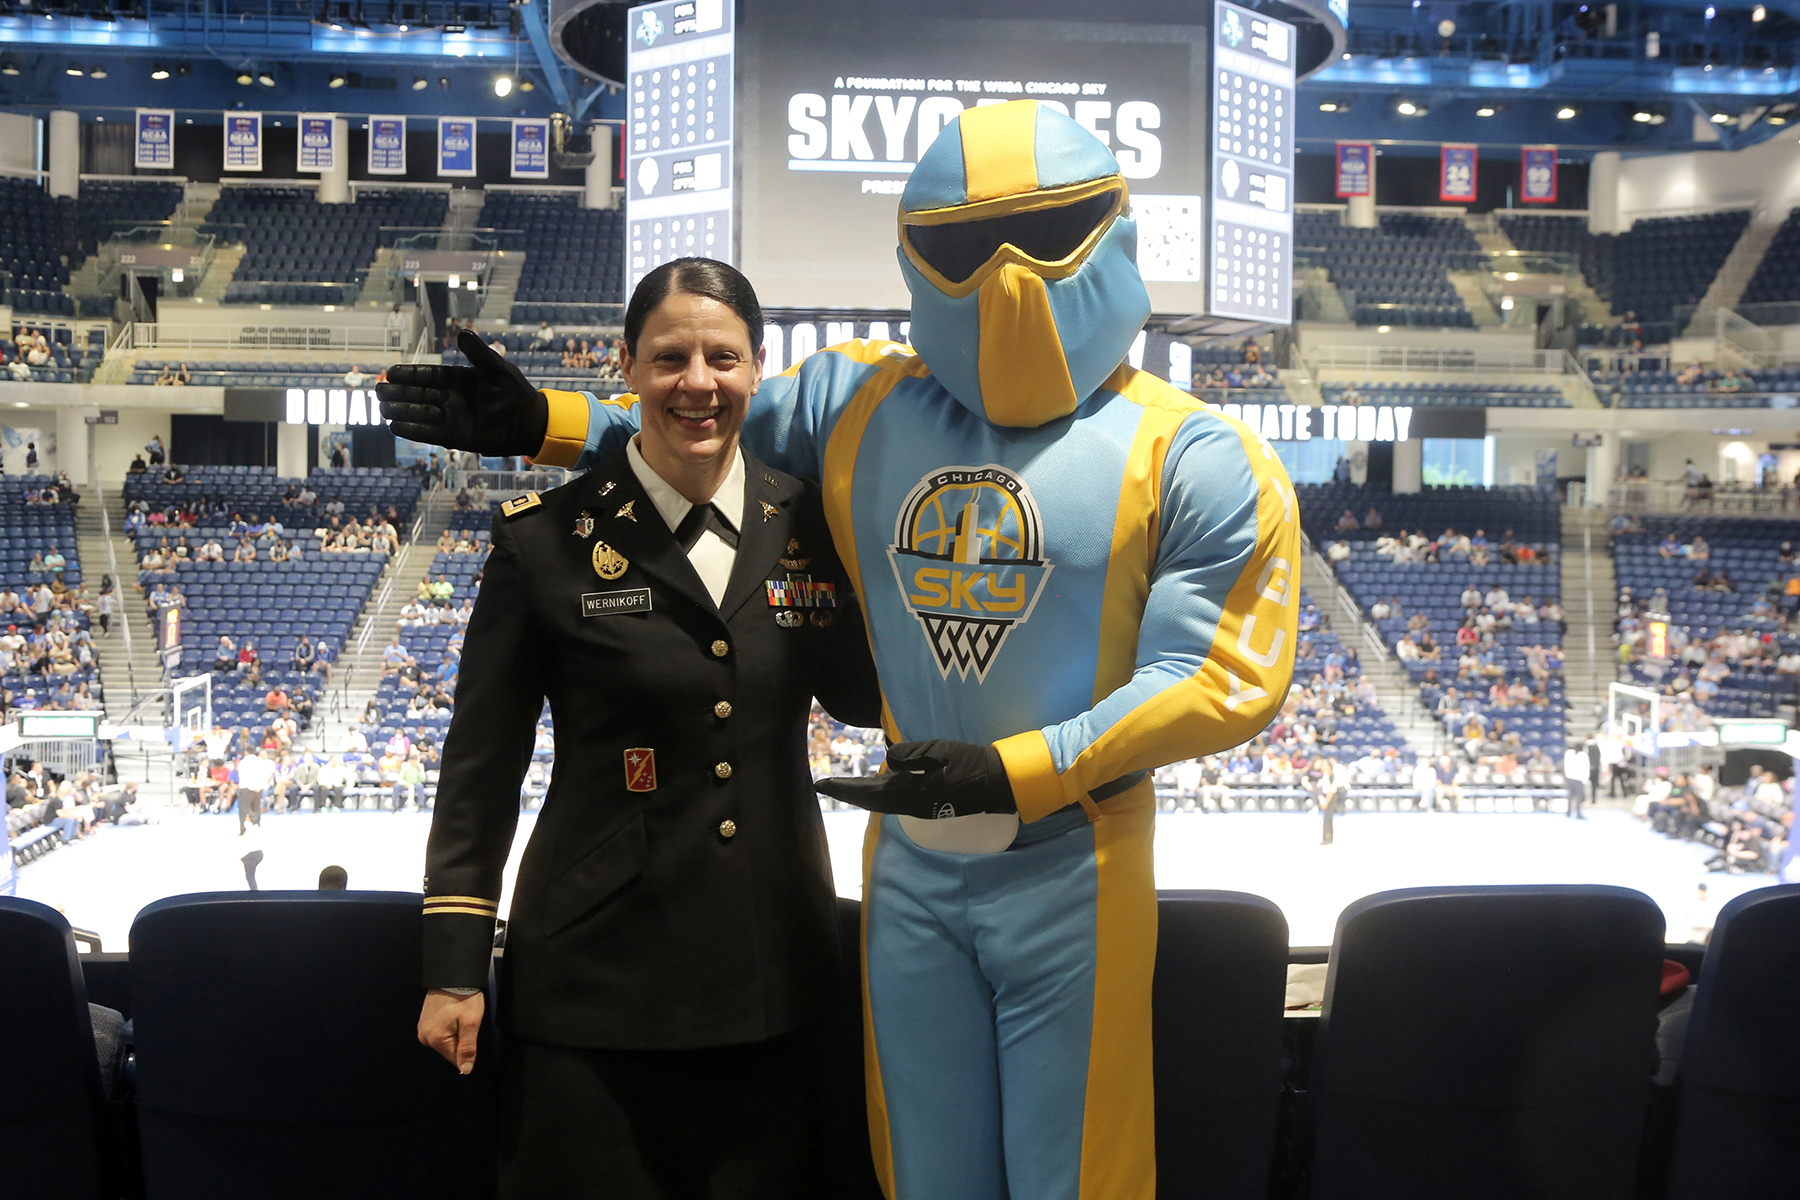 Army Reserve Officer receives honor during Chicago Sky WNBA